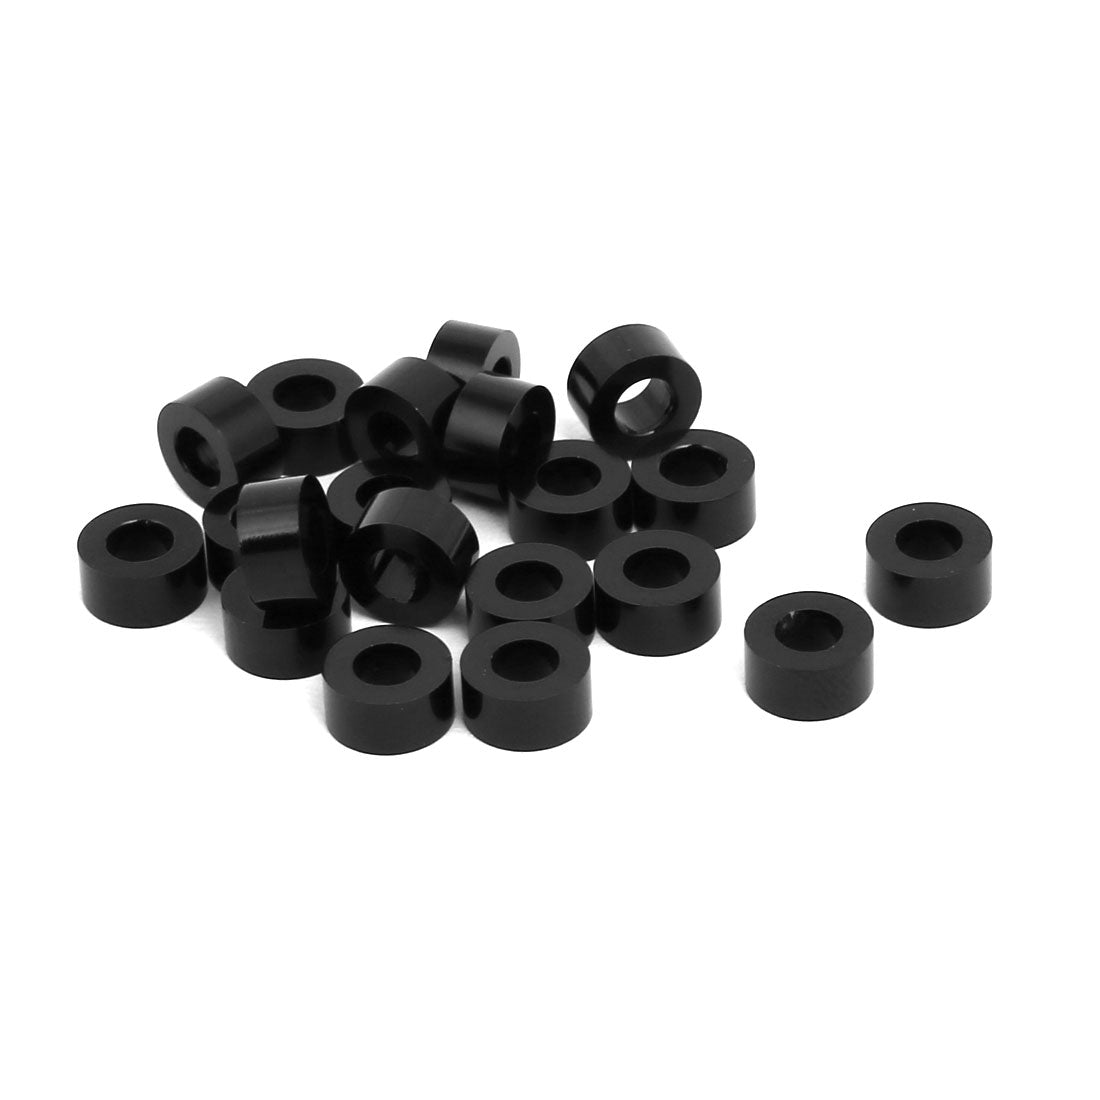 uxcell Uxcell 20pcs 3mm Thickness M3 Aluminum Alloy Flat  Screw Washer Black